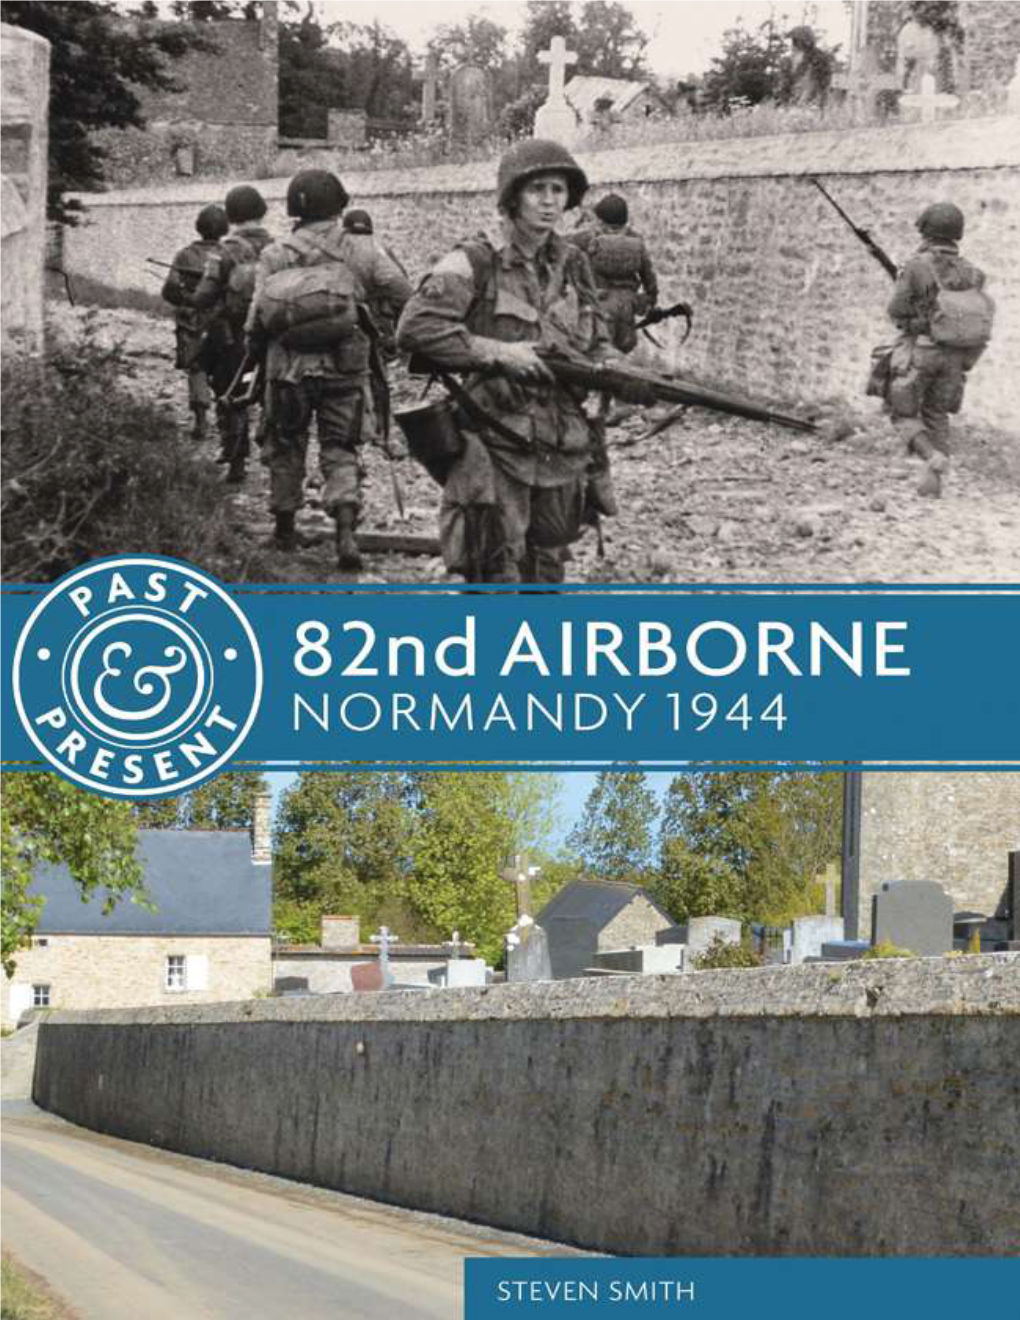 82Nd AIRBORNE NORMANDY 1944